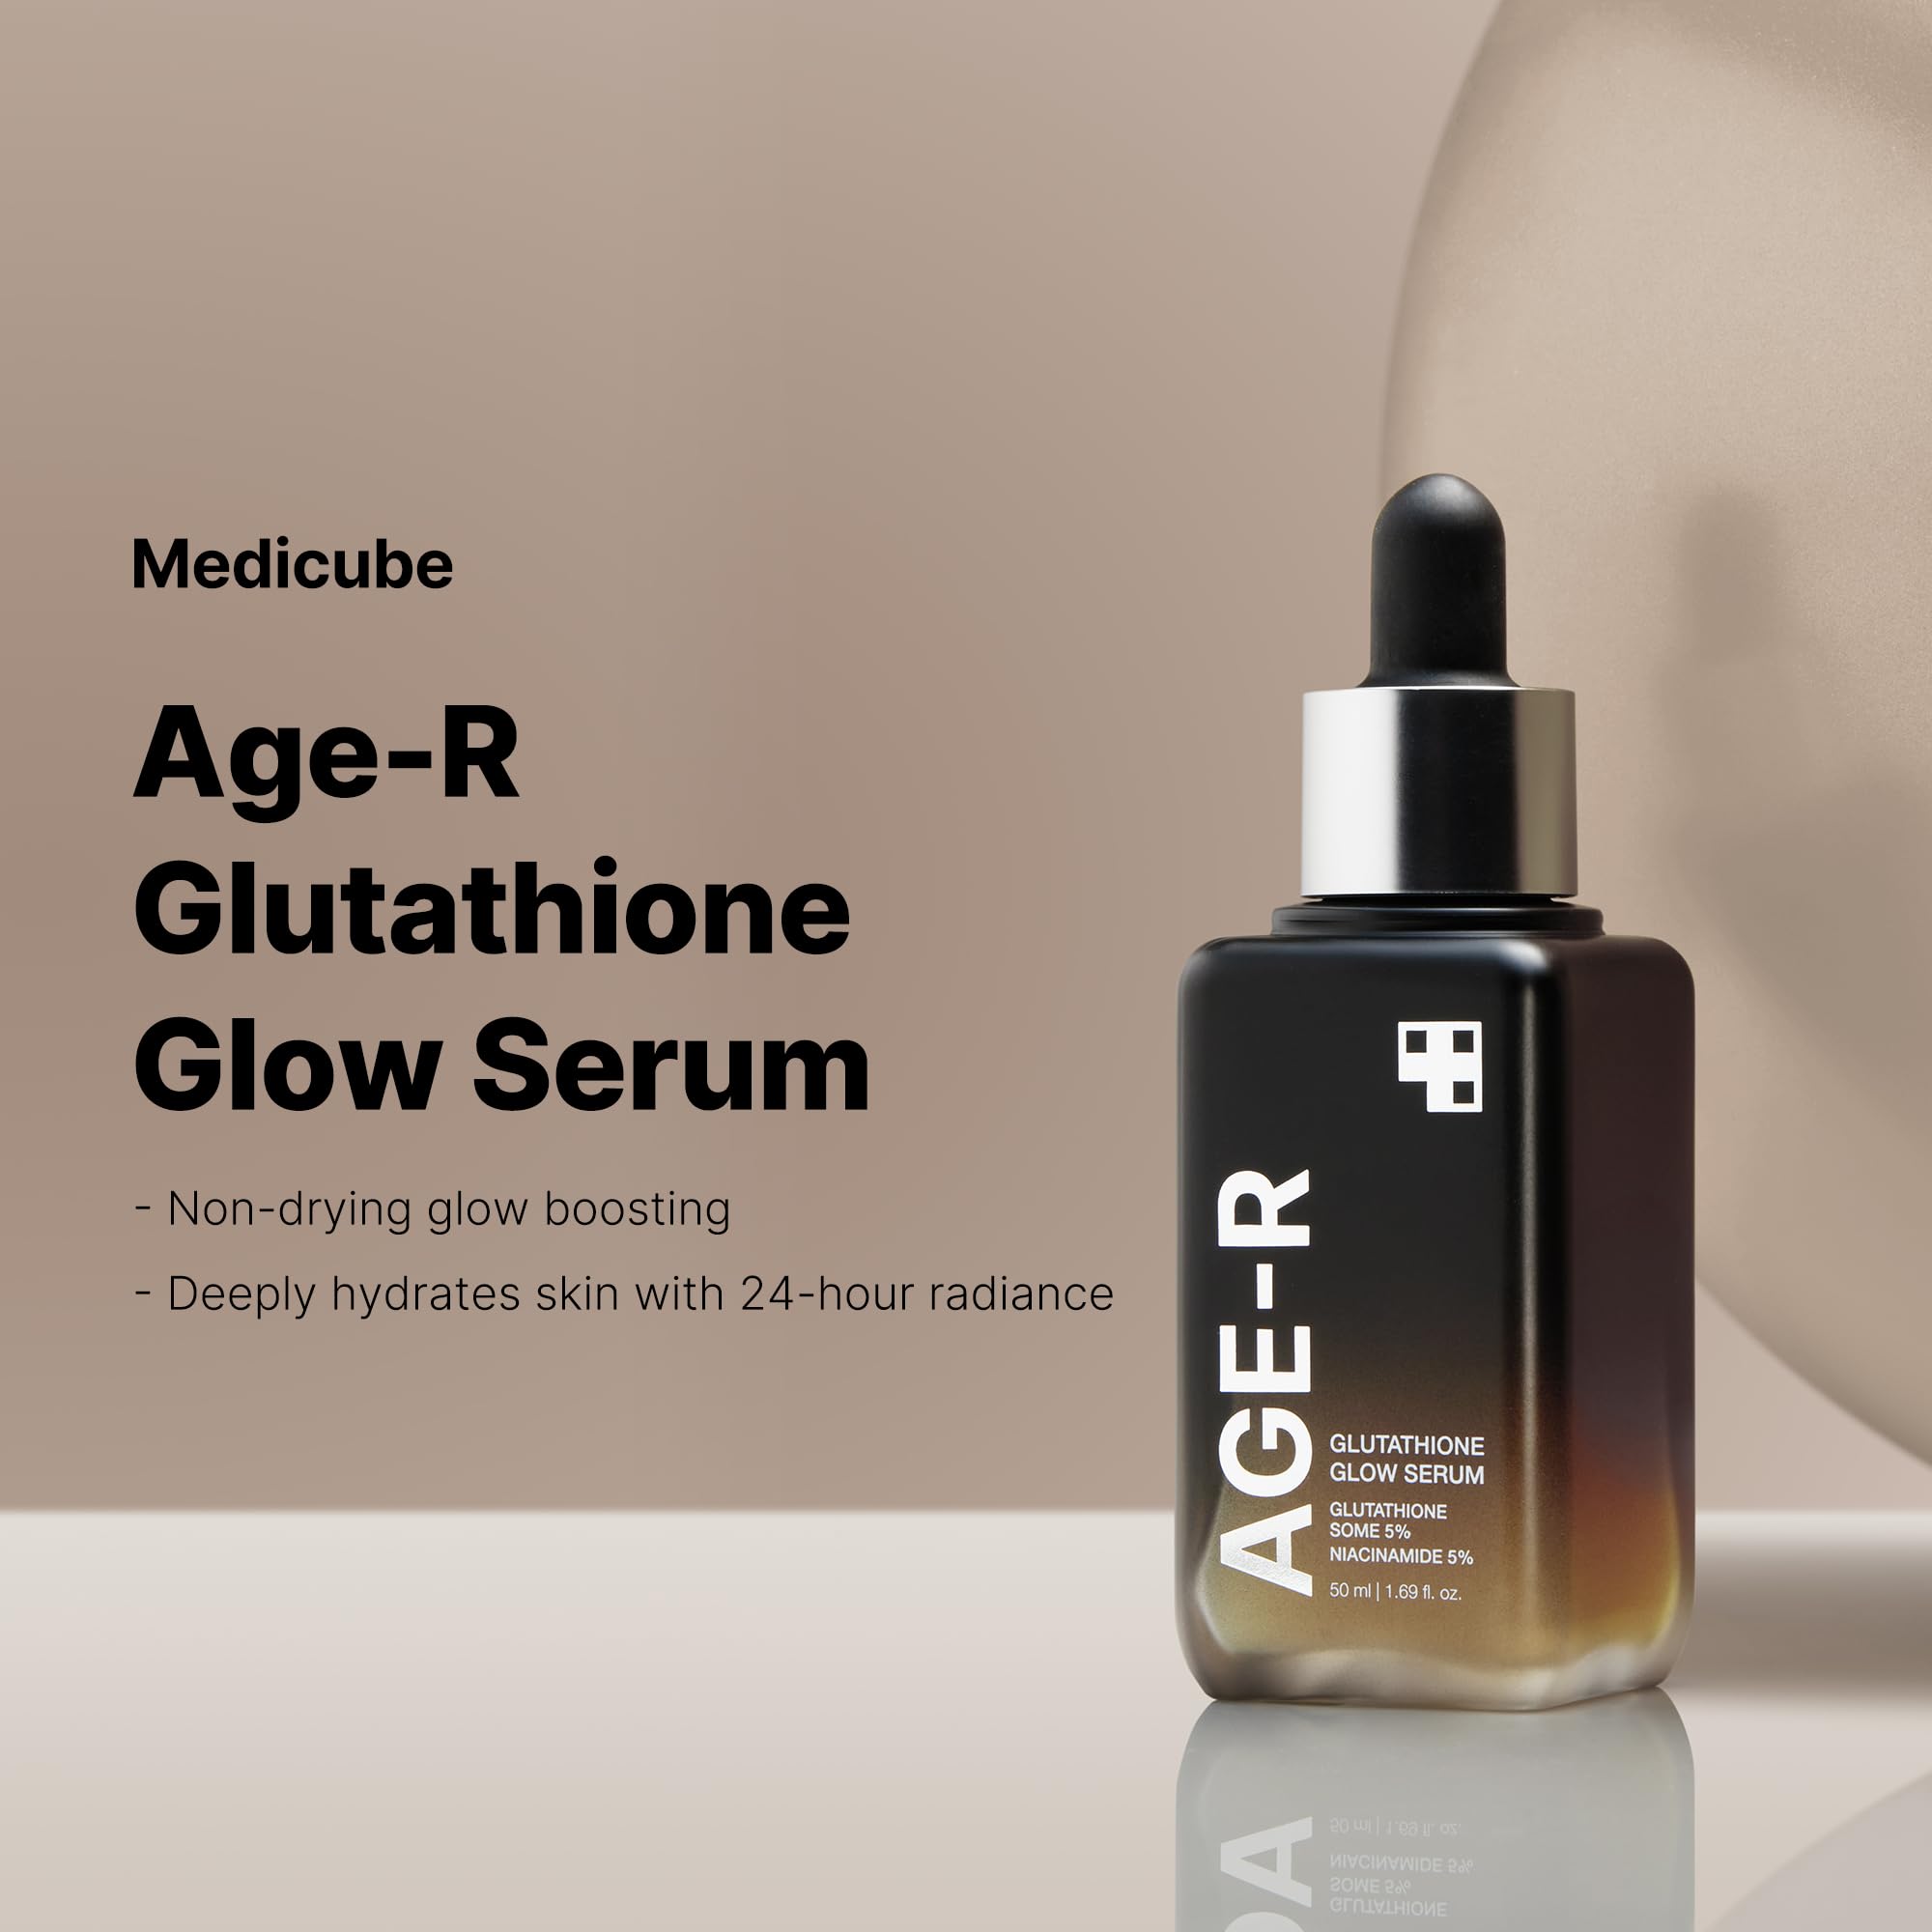 Medicube AGE-R Glutathione Glow Serum - Exclusive Pigmentation & Elasticity Serum for 24Hr Pure Radiance - Glowing with Active Glow-zom Technology - Daily Use for Youthful Skin - Korean Skin Care